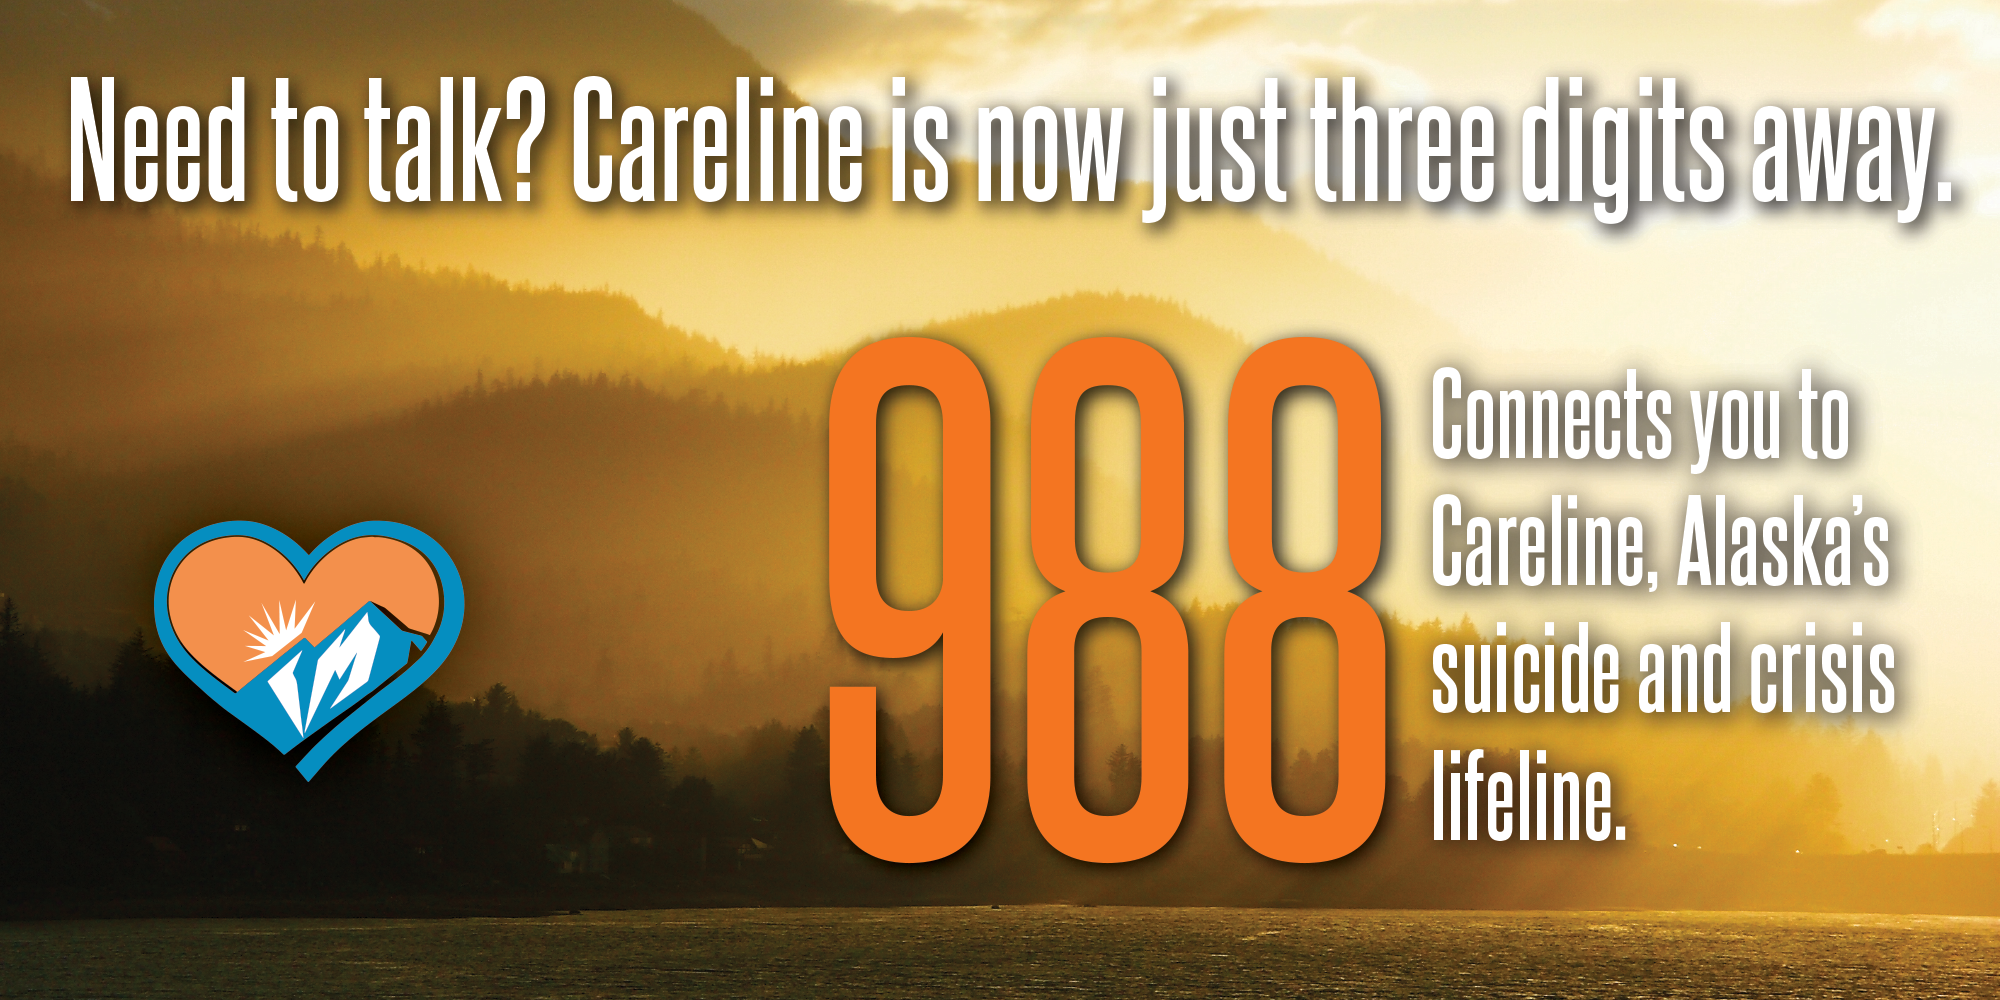 Need to talk? Careline is now just three digits away. 988 Connects you to Careline, Alaska’s suicide and crisis lifeline.